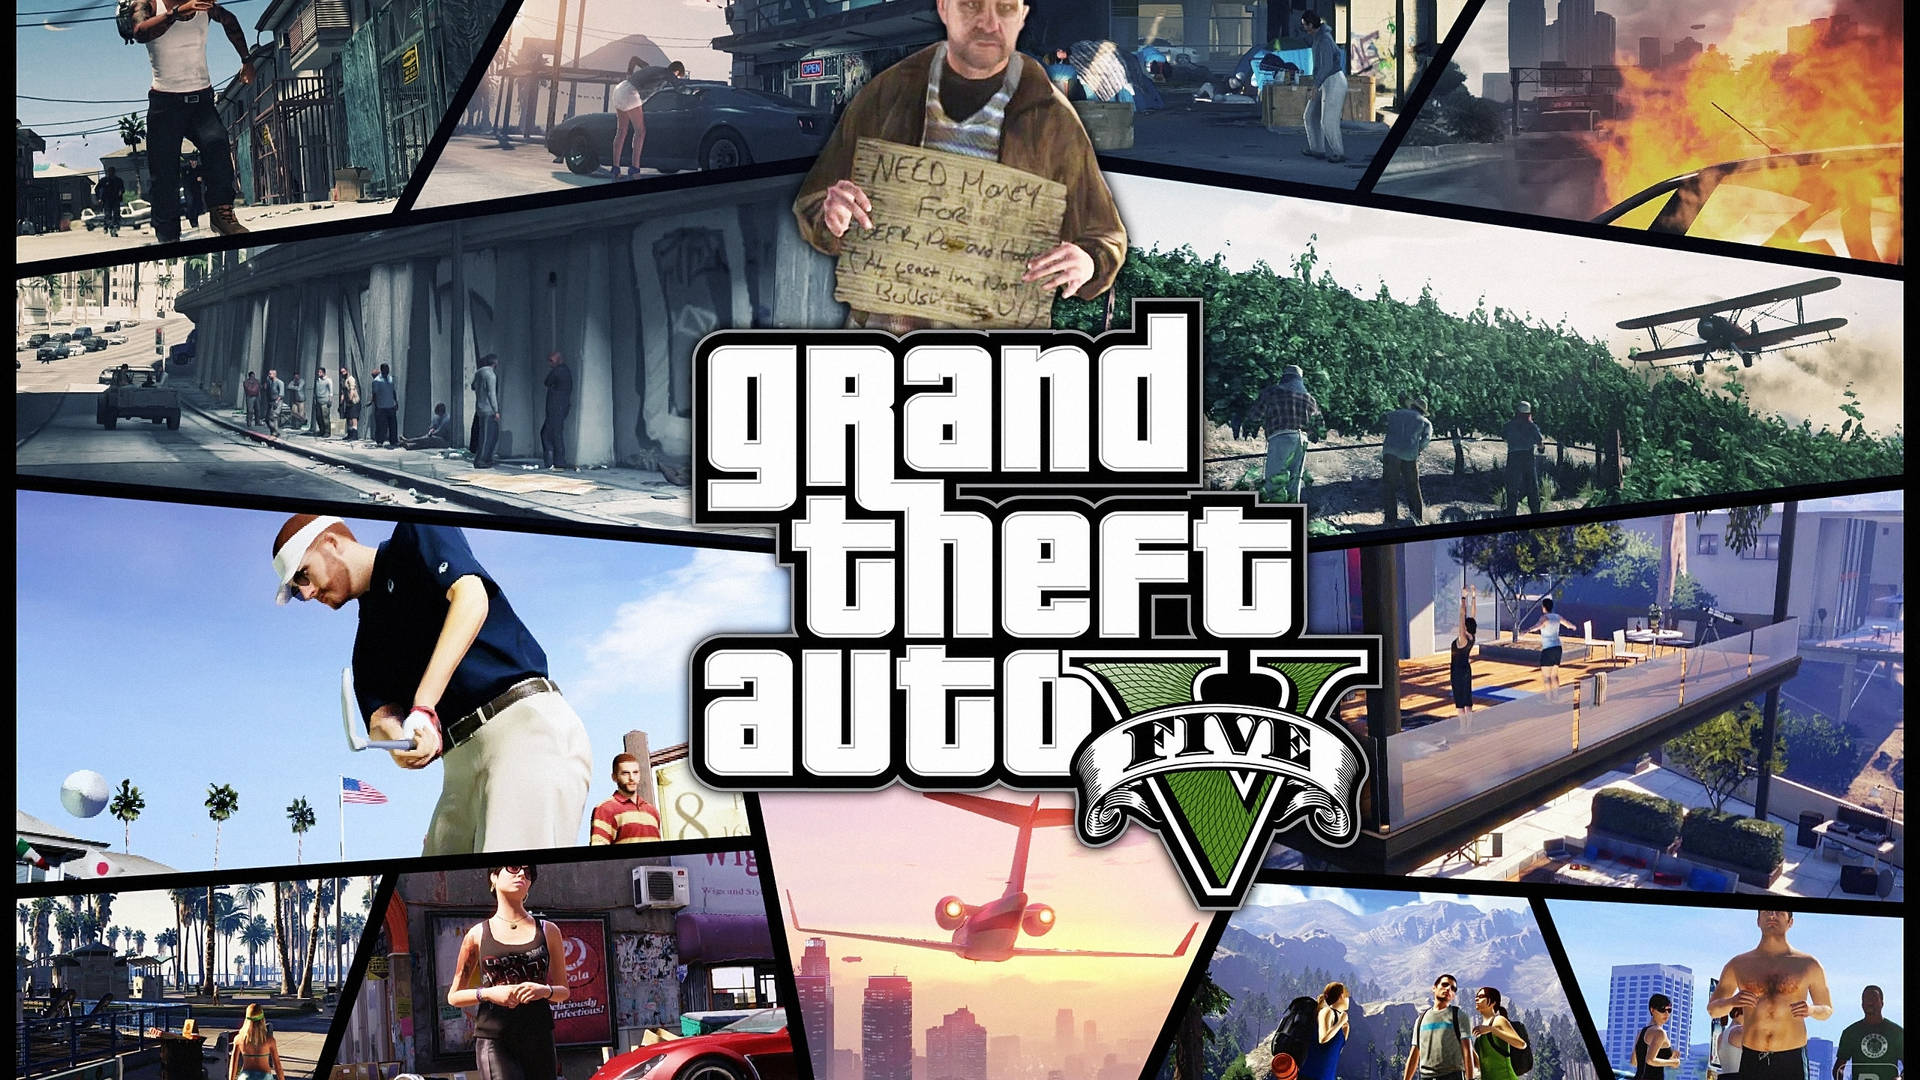 Gta 5 2560x1440 Various Scenes Poster Picture